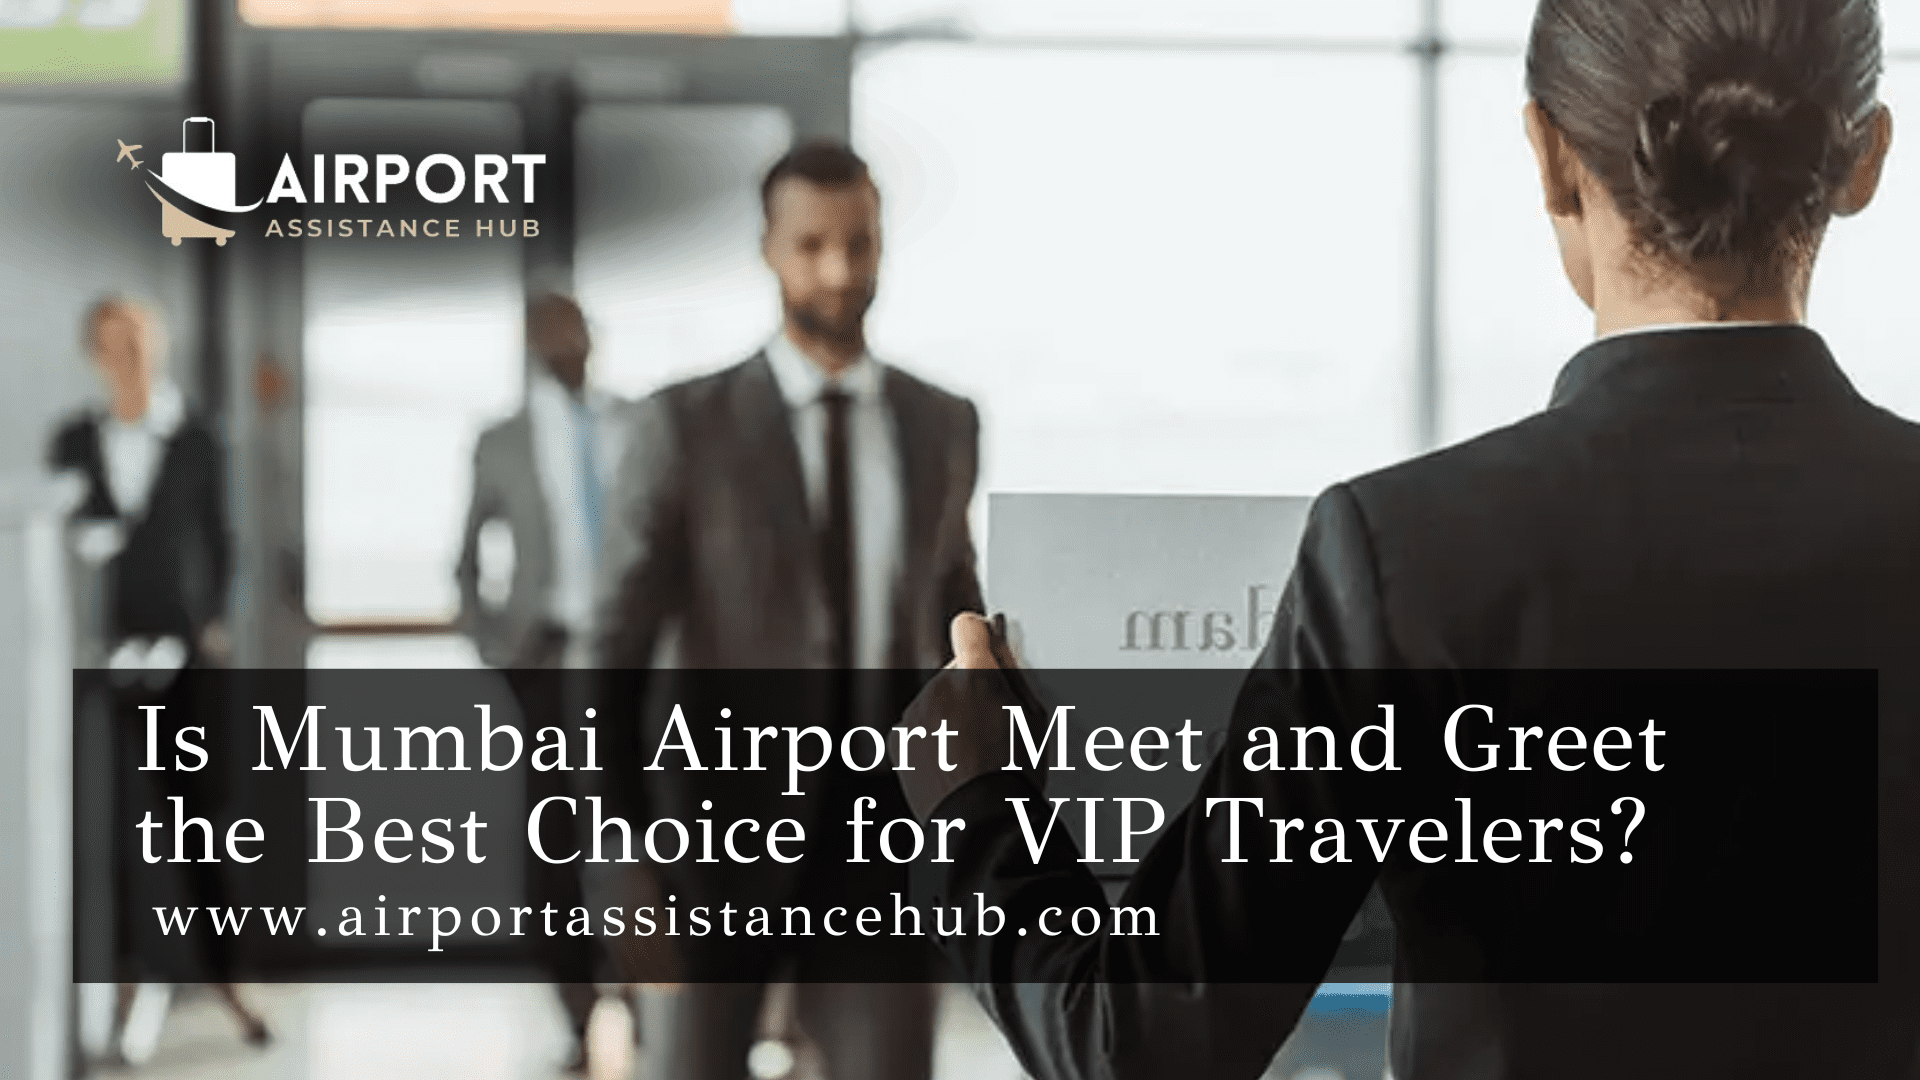 Is Mumbai Airport Meet and Greet the Best Choice for VIP Travelers?